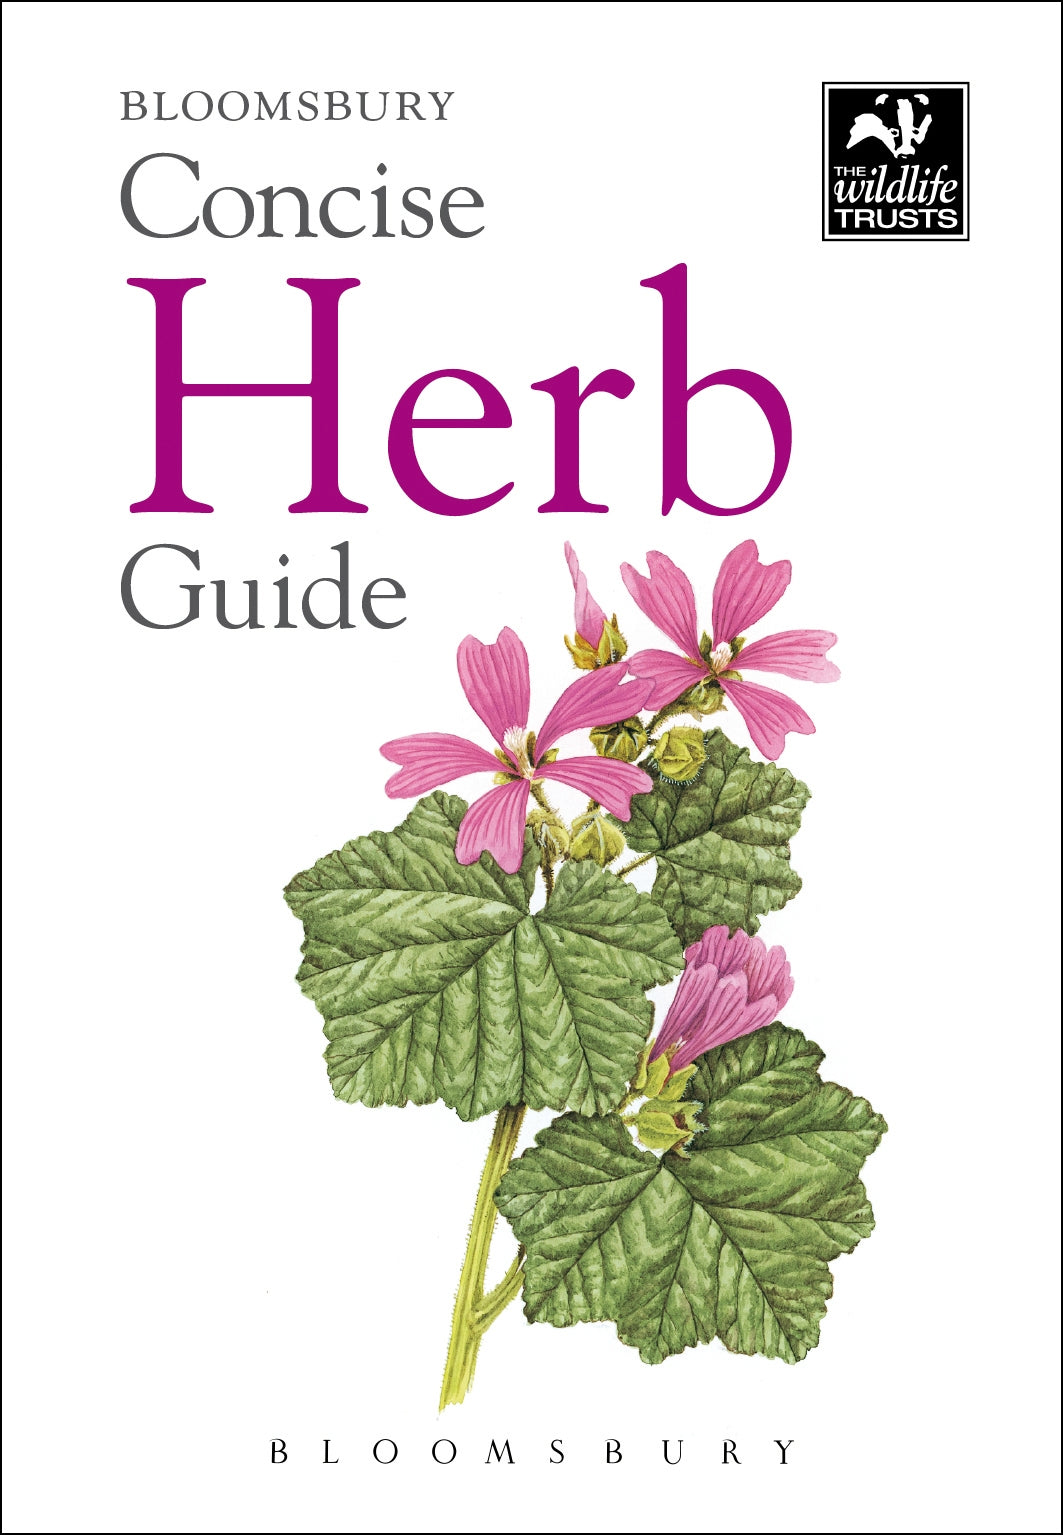 Bloomsbury concise guide - Herb